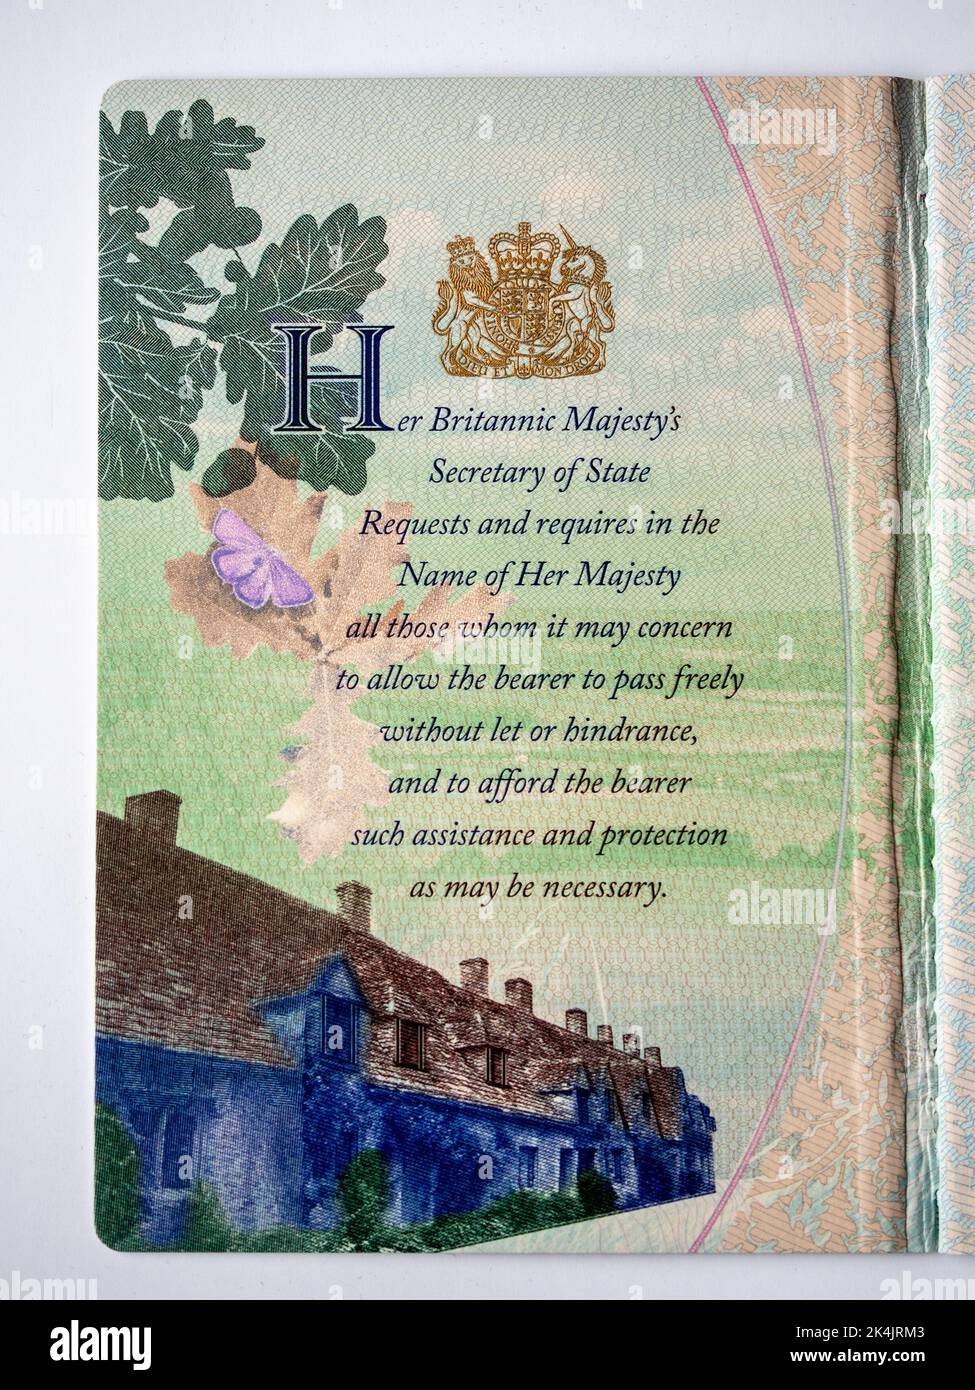 The inside cover of a British Passport referencing Her Britannic Majesty; one of the many documents that require amendment following her death. Stock Photo